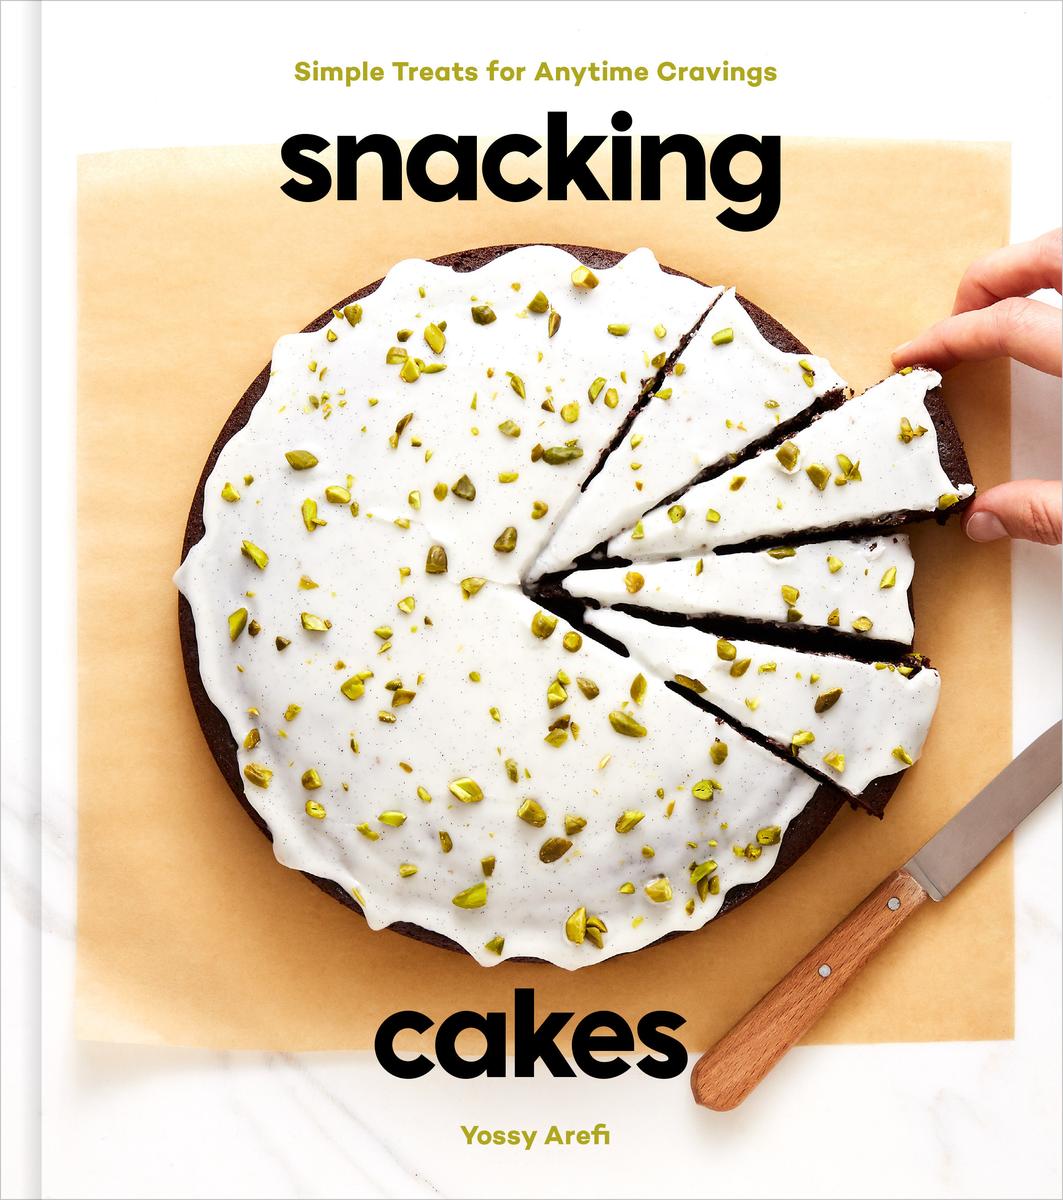 Snacking Cakes - Simple Treats for Anytime Cravings: A Baking Book